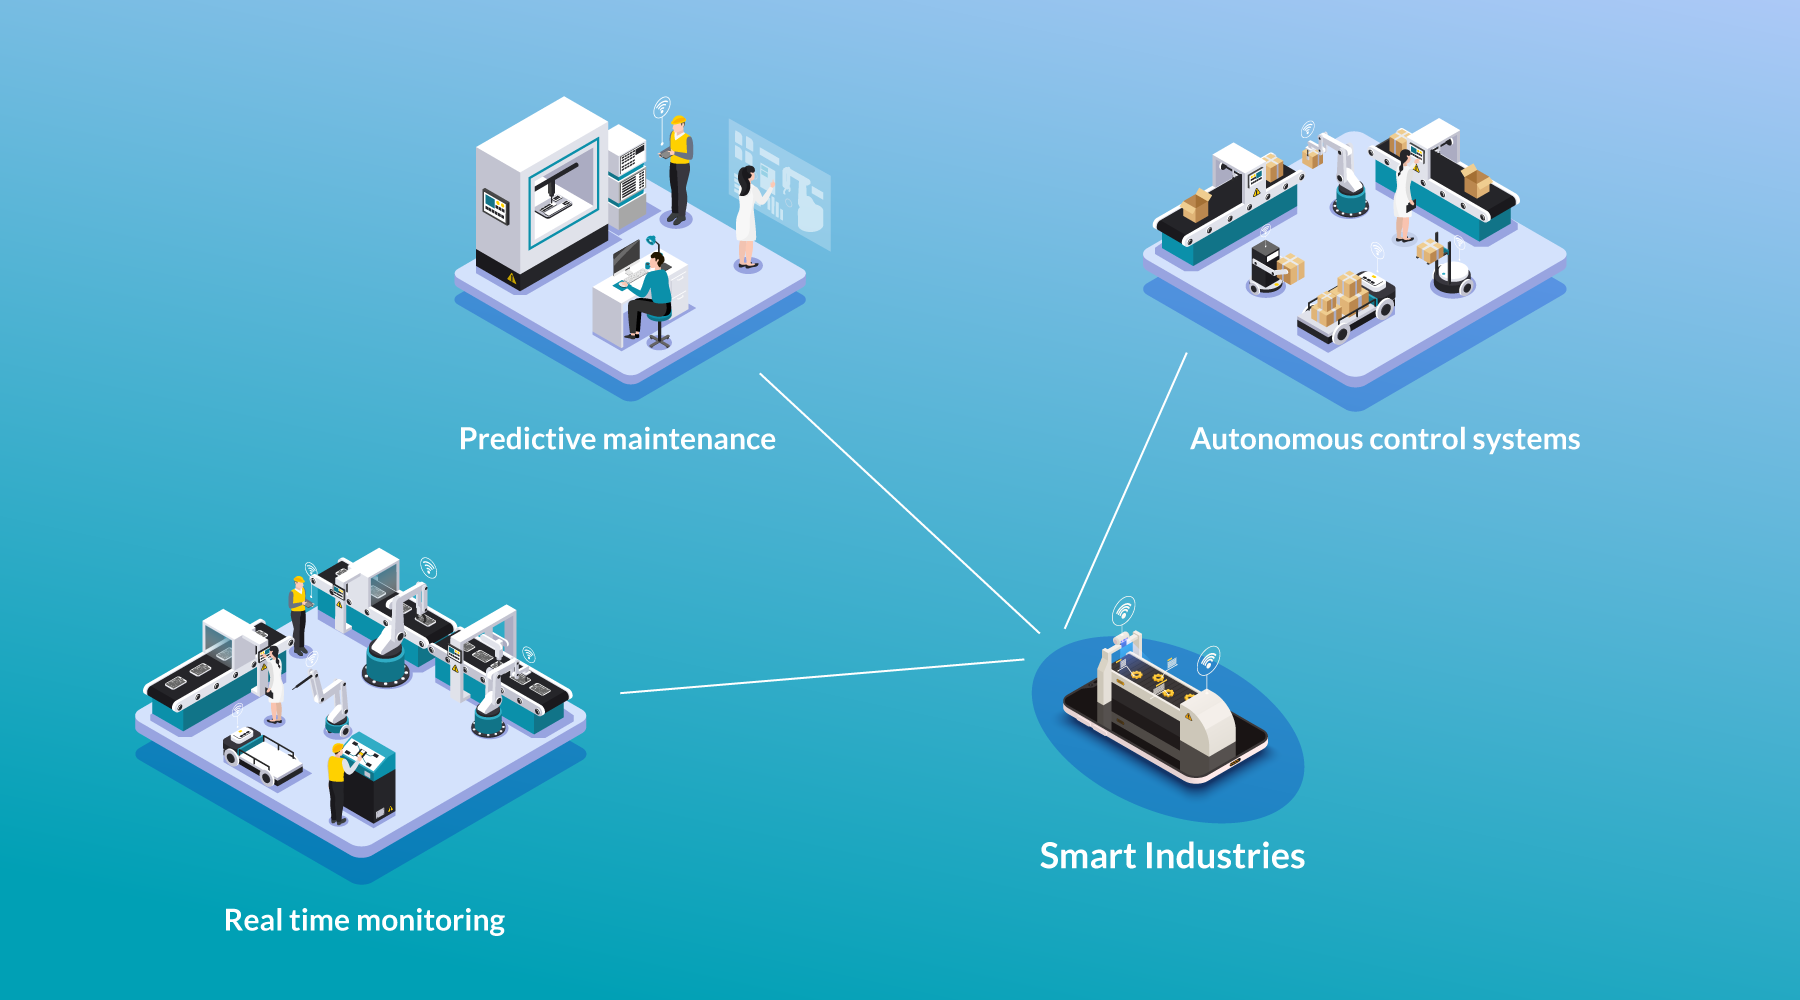 an image explaining all the uses of iot in industrial automation